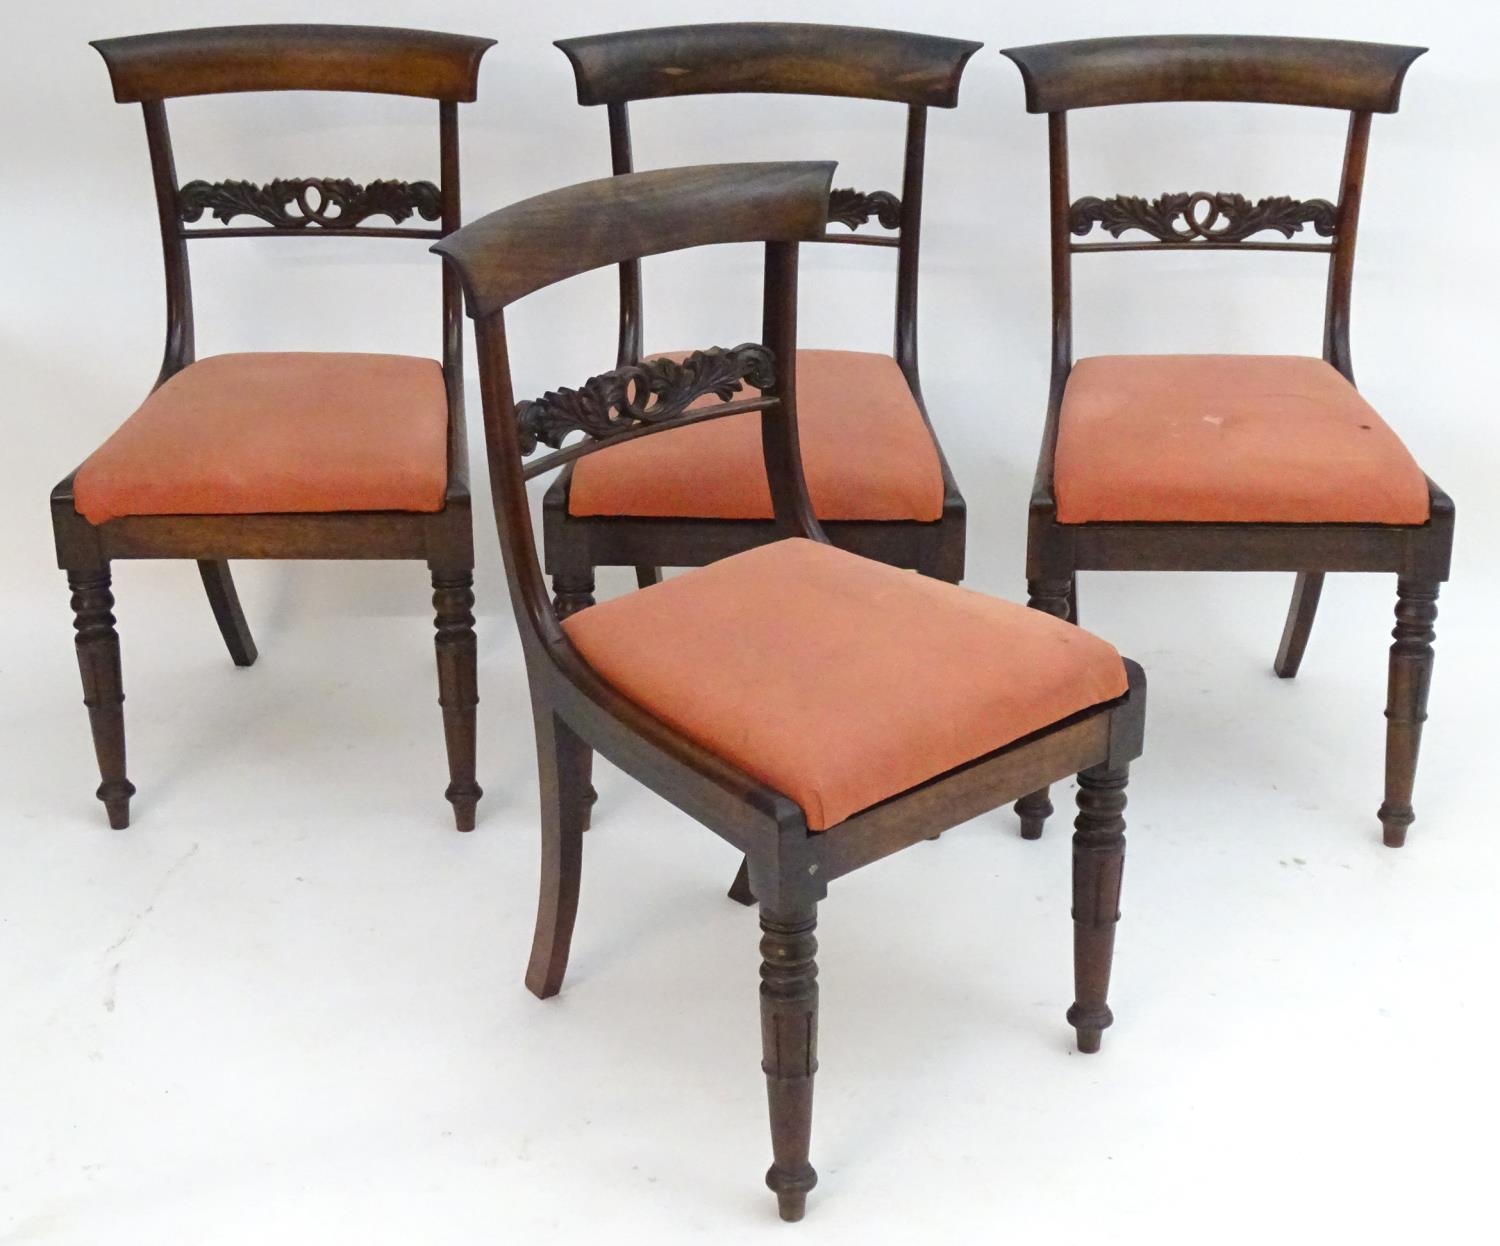 A set of four William IV rosewood dining chairs with shaped top rails, pierced mid rails, drop in